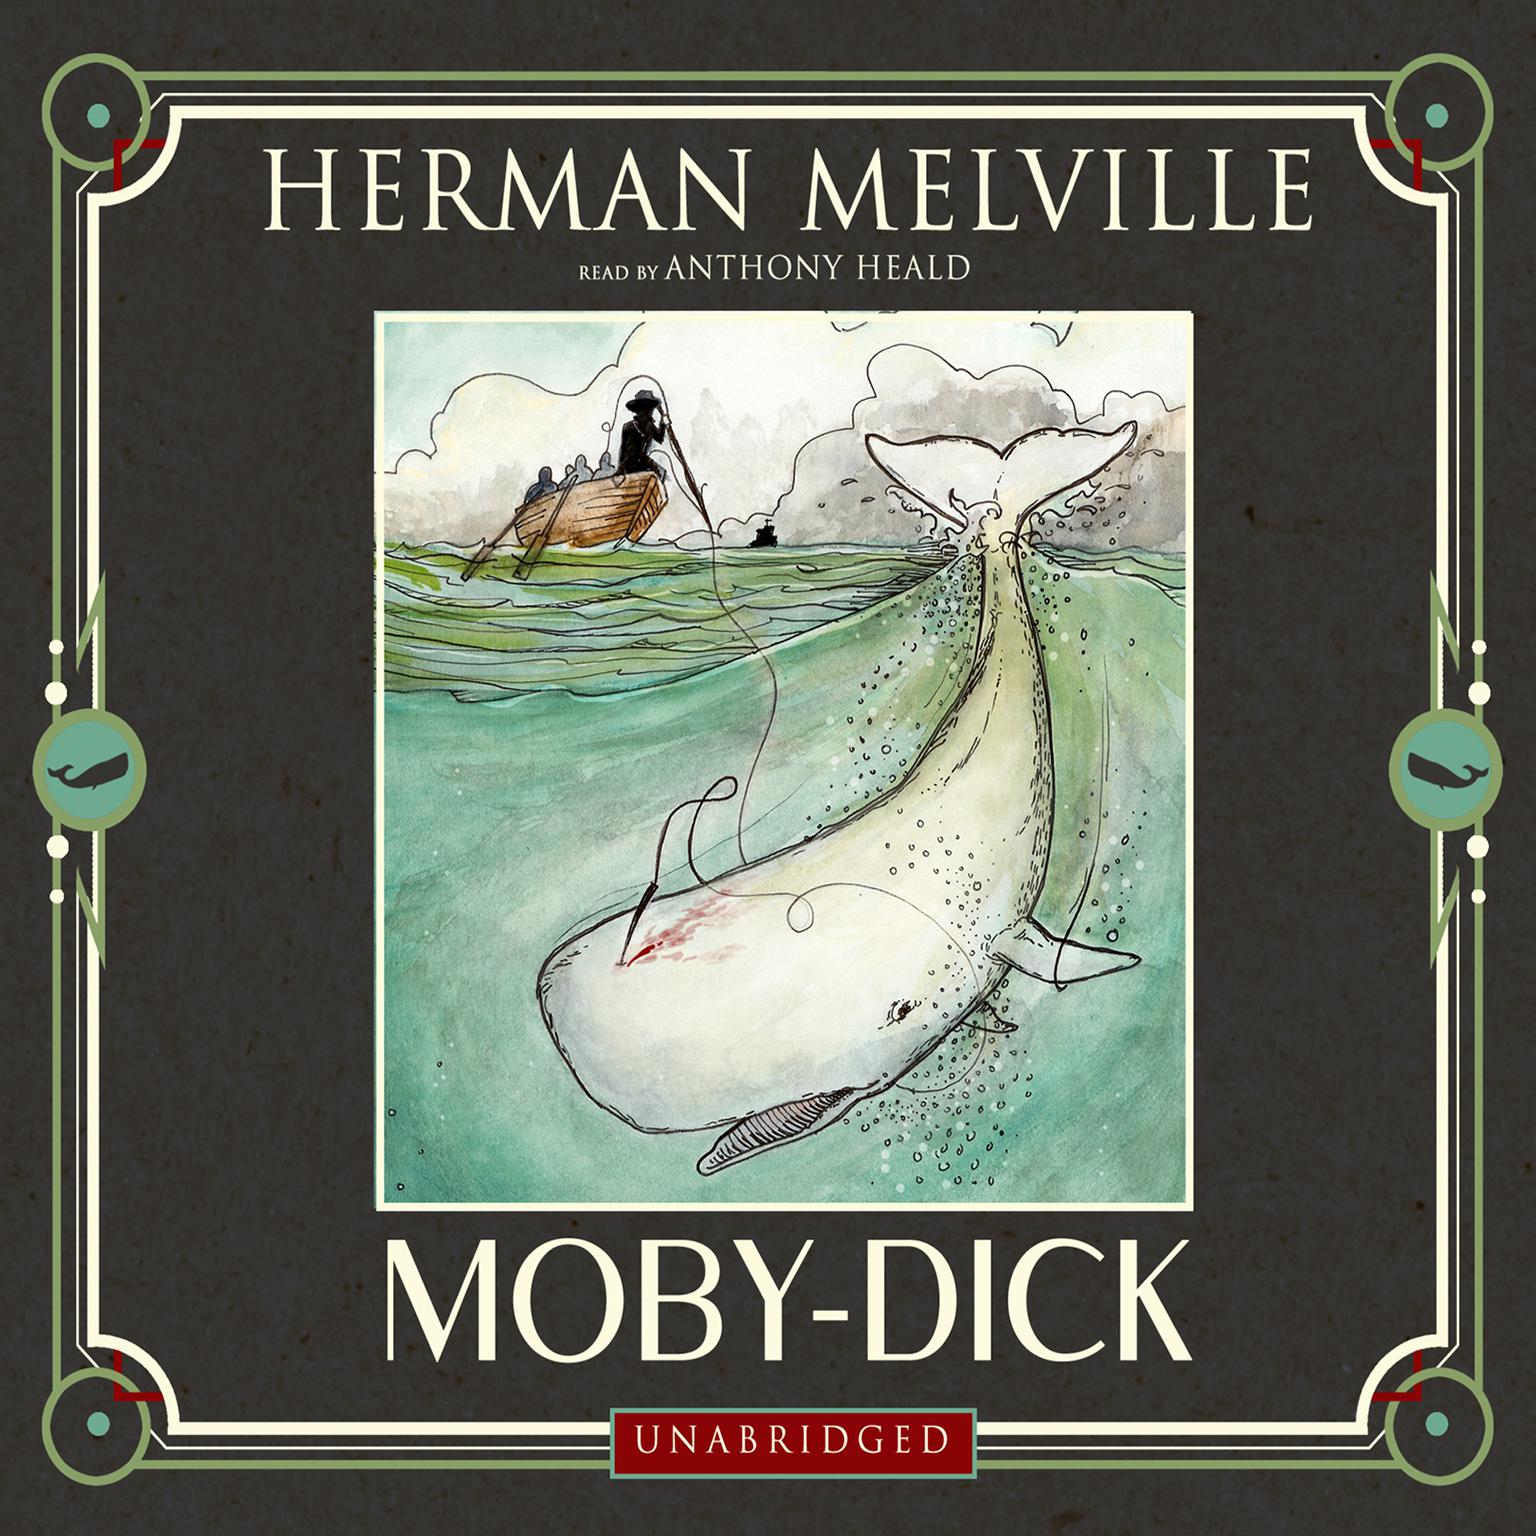 Moby-Dick Audiobook, by Herman Melville